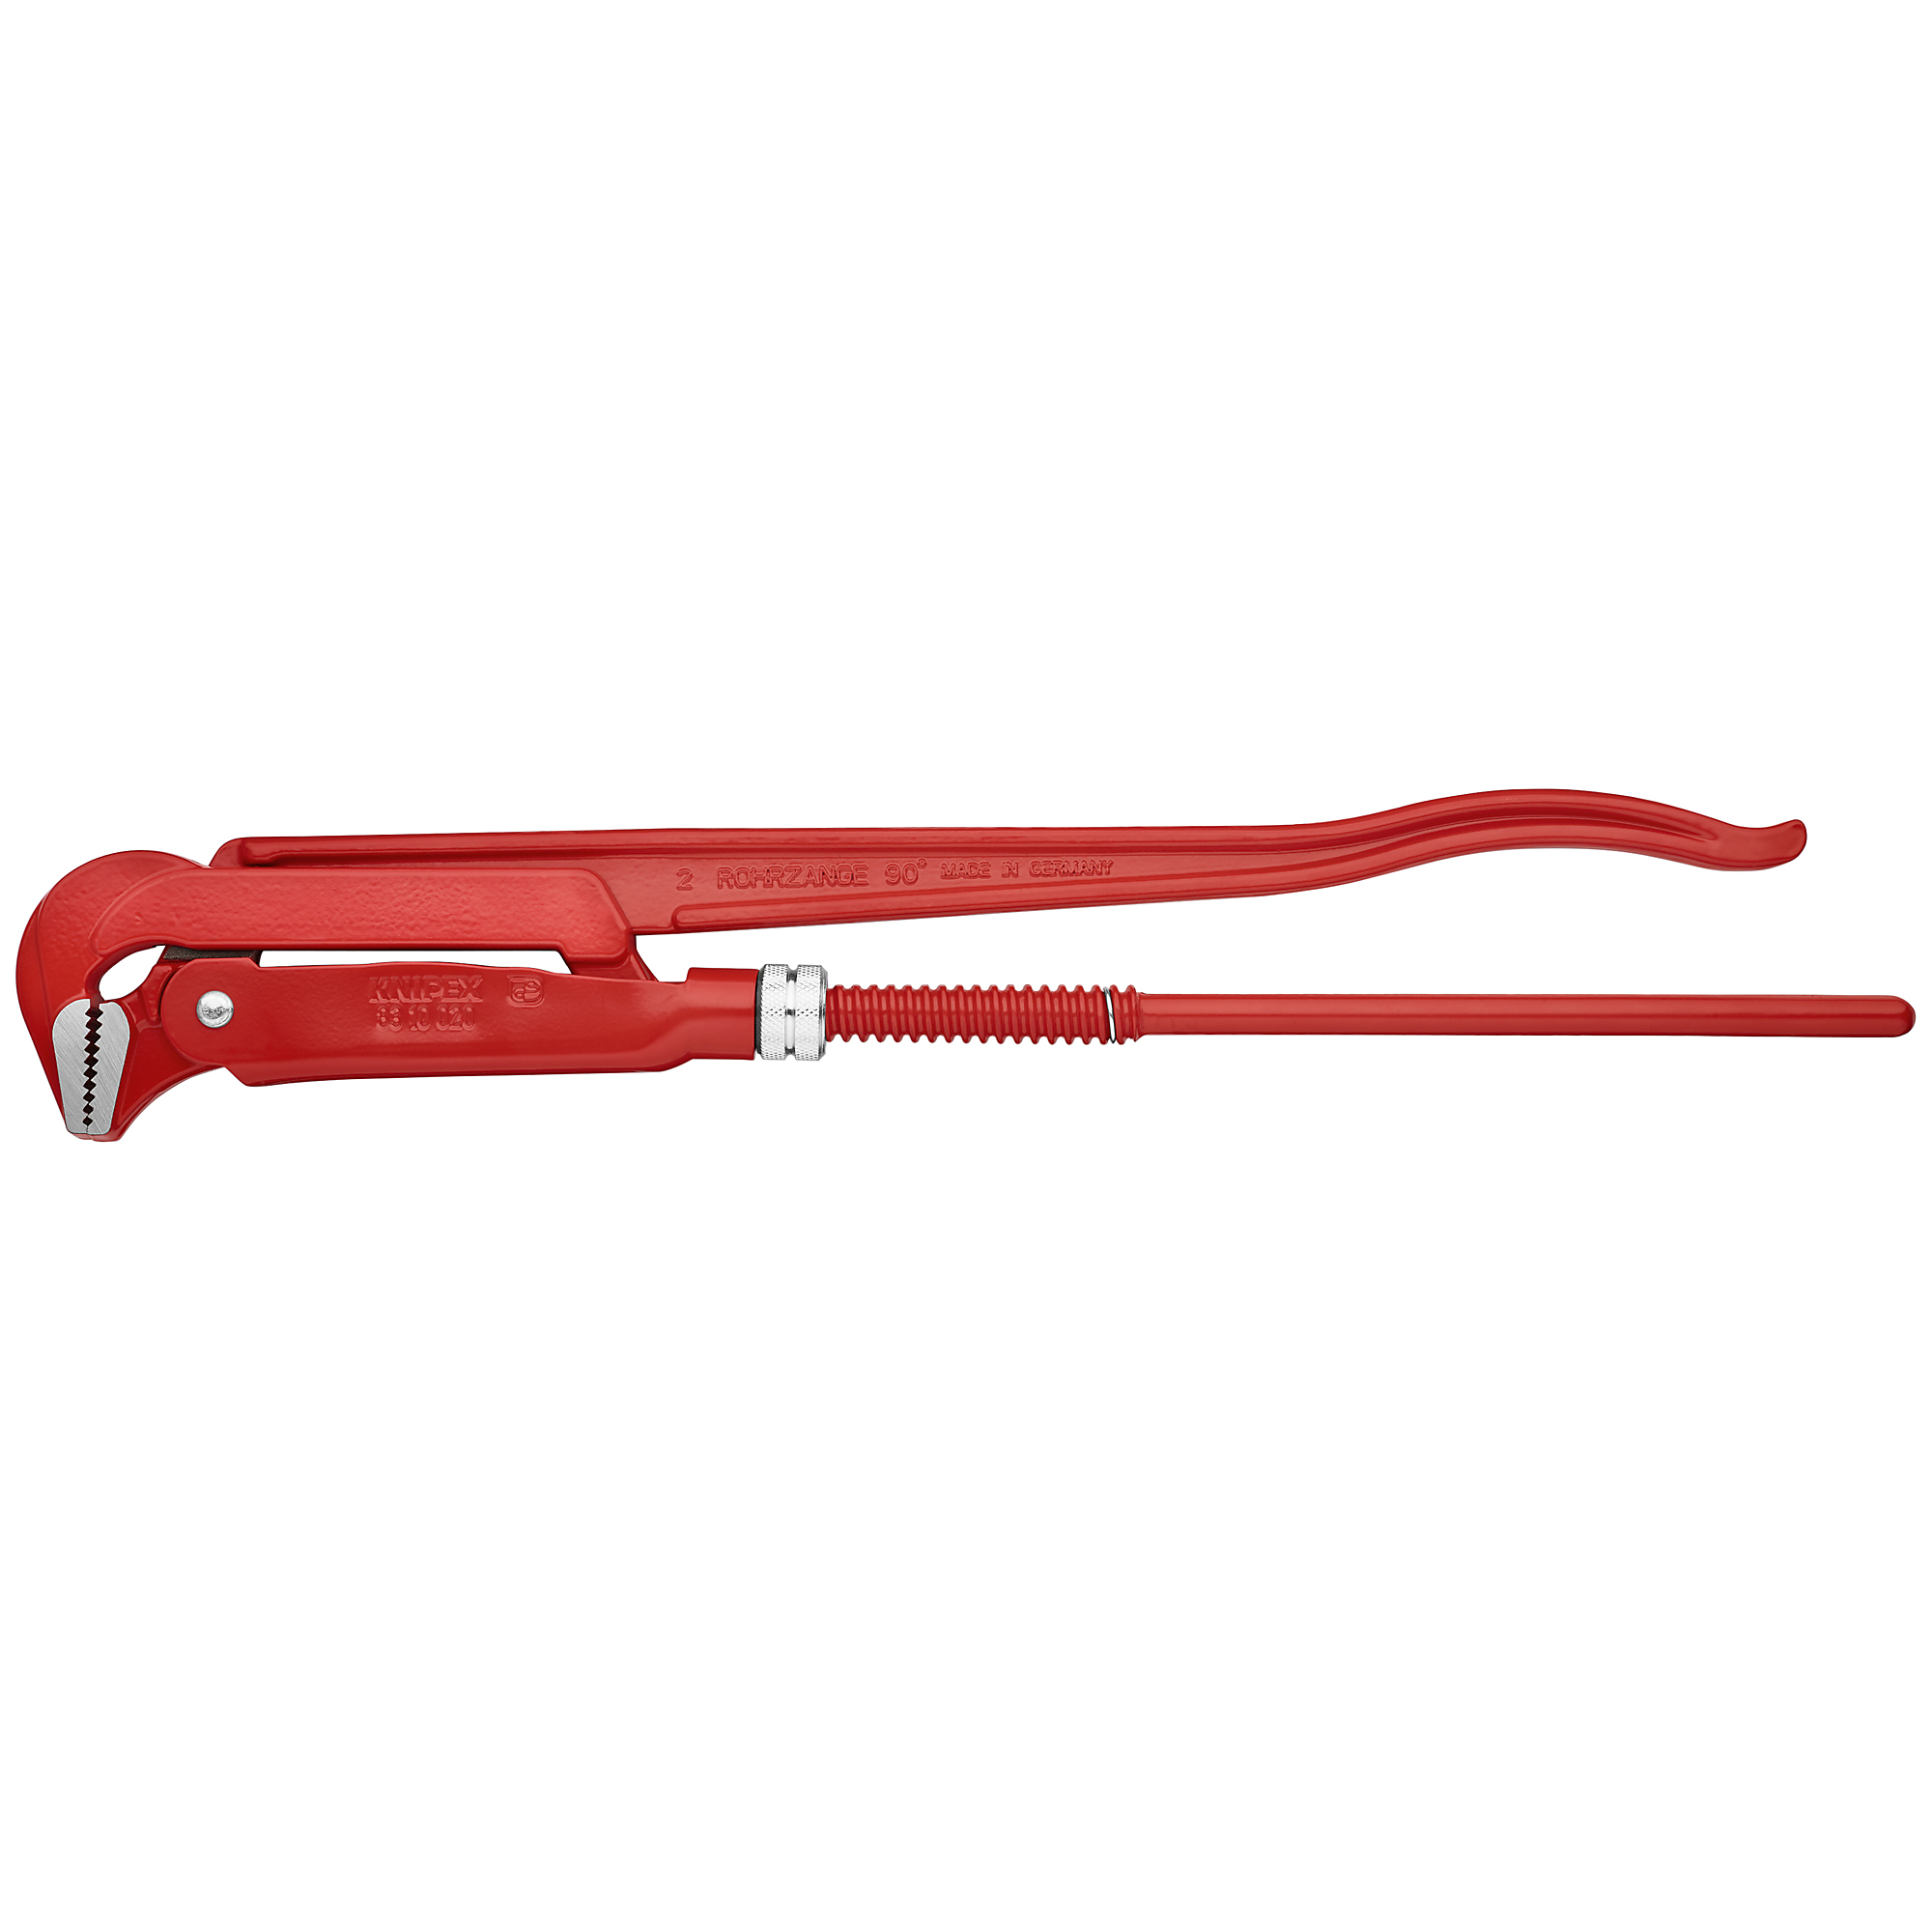 KNIPEX, Swedish Pipe Wrench-90Â°, 21.75Inch, Pieces (qty.) 1 Material Steel, Jaw Capacity 2.75 in, Model 83 10 020